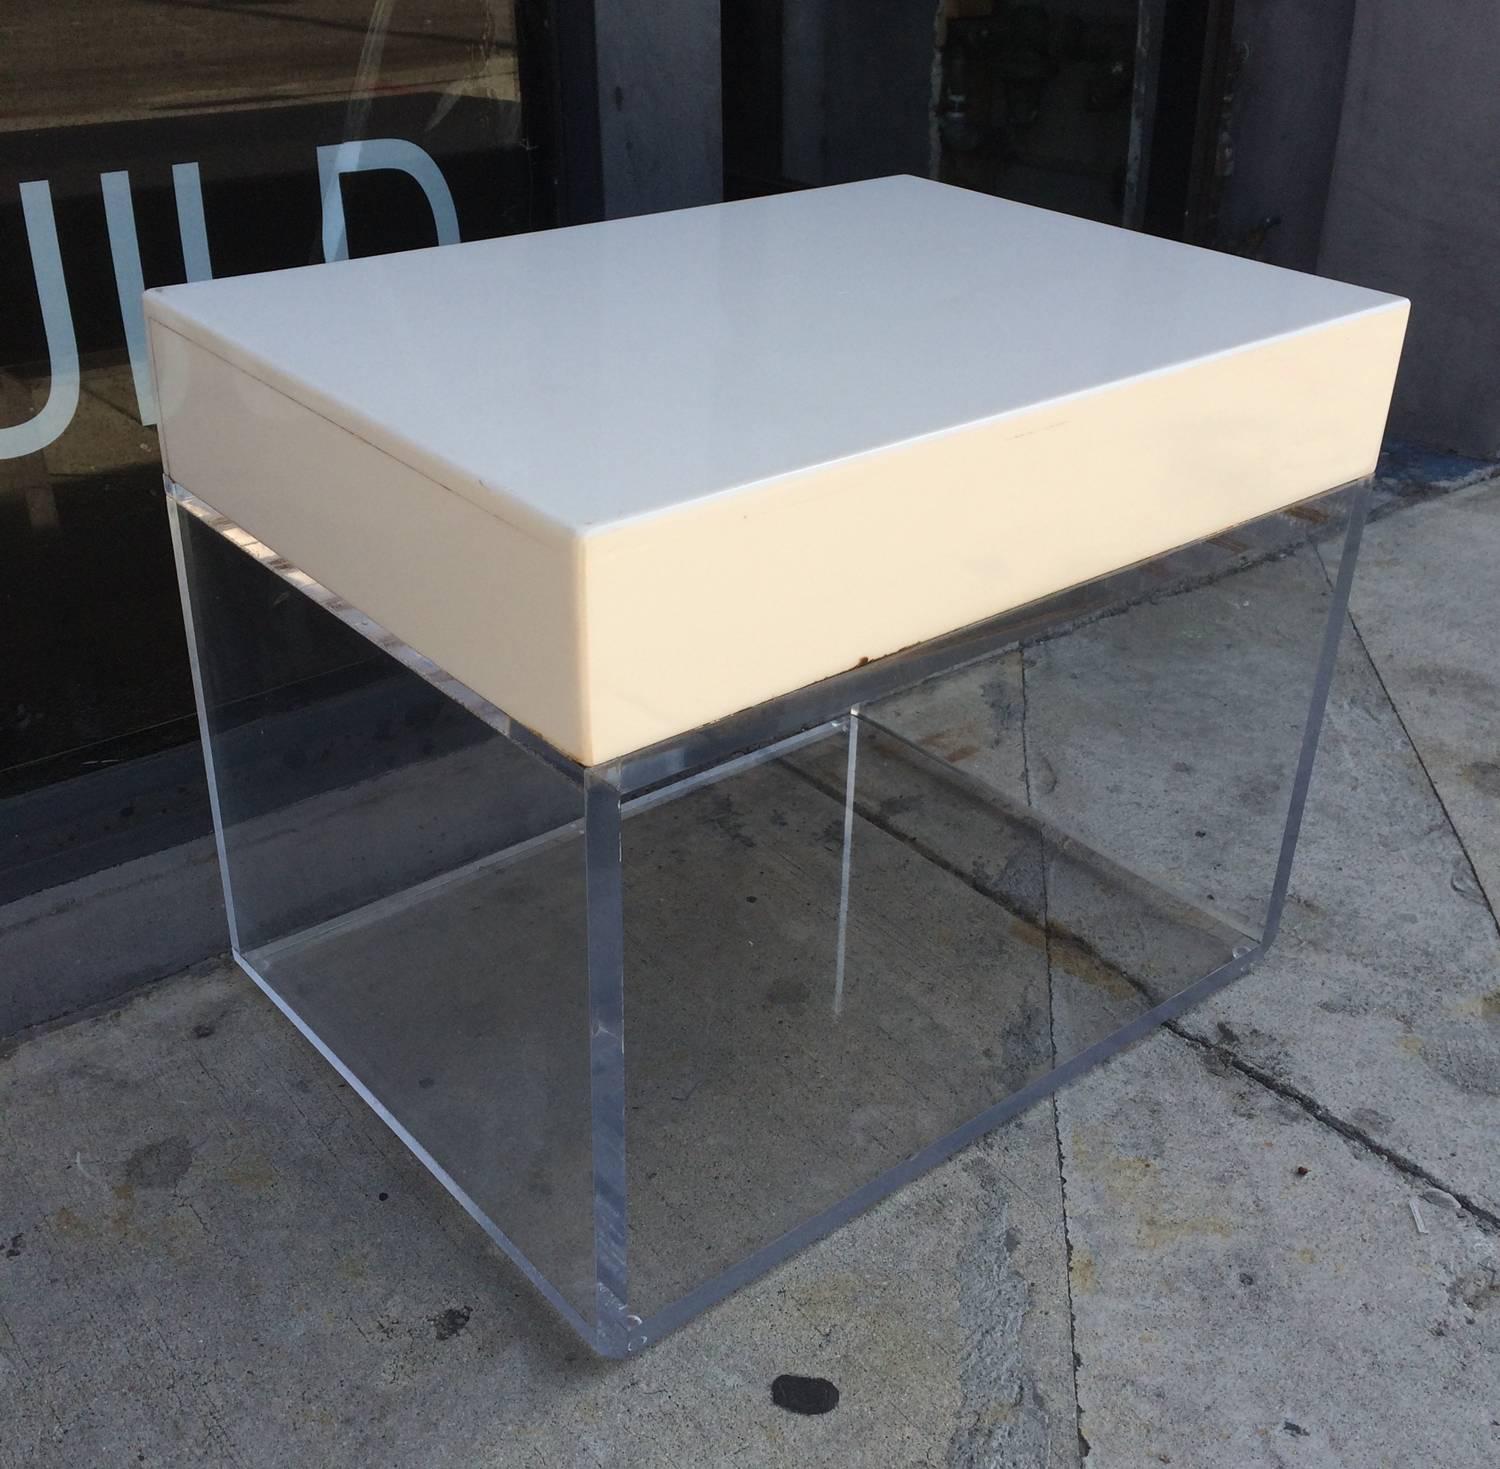 Stunning pair of side tables/benches in Lucite and Corian designed and manufactured by Cain Modern.
The pieces can be used either as benches or side tables, the Corian surface has an off white color and the Lucite is clear and 3/4